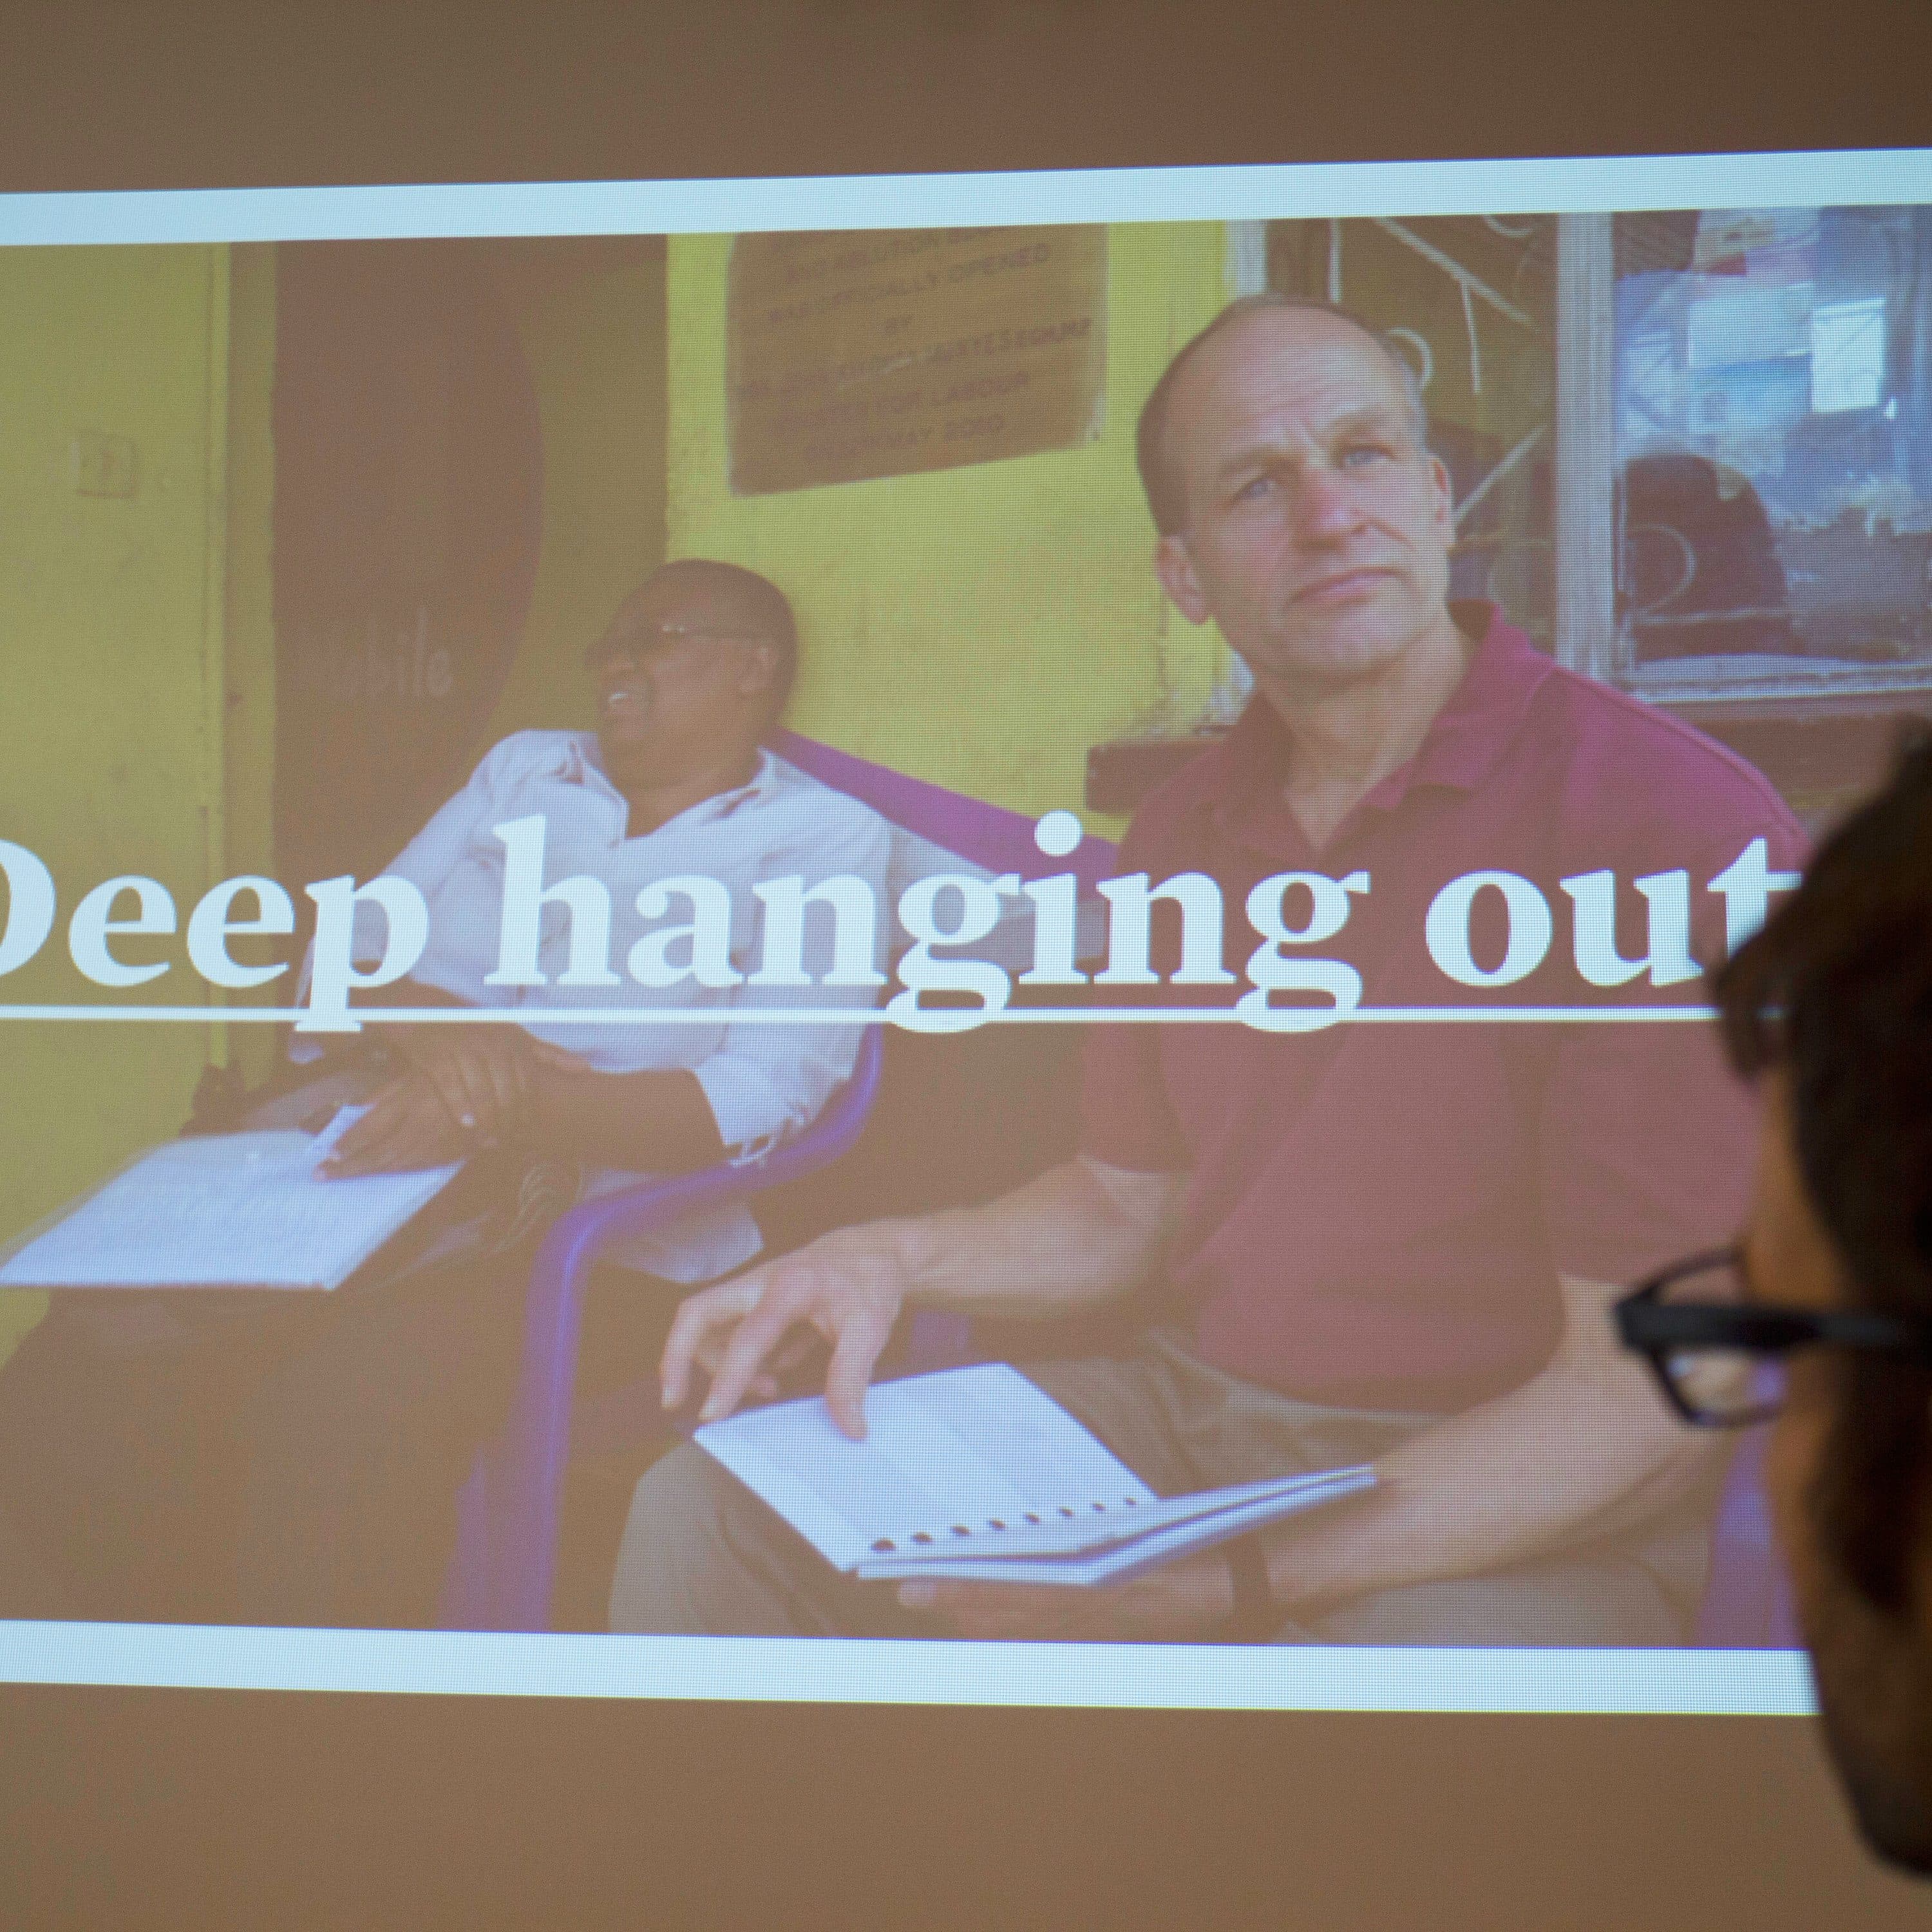 A man is in the foreground looking at a projected image on a screen. The image shows two men sitting outside, with one holding a notebook and the other relaxed. The text "Deep hanging out" is displayed prominently on the screen.